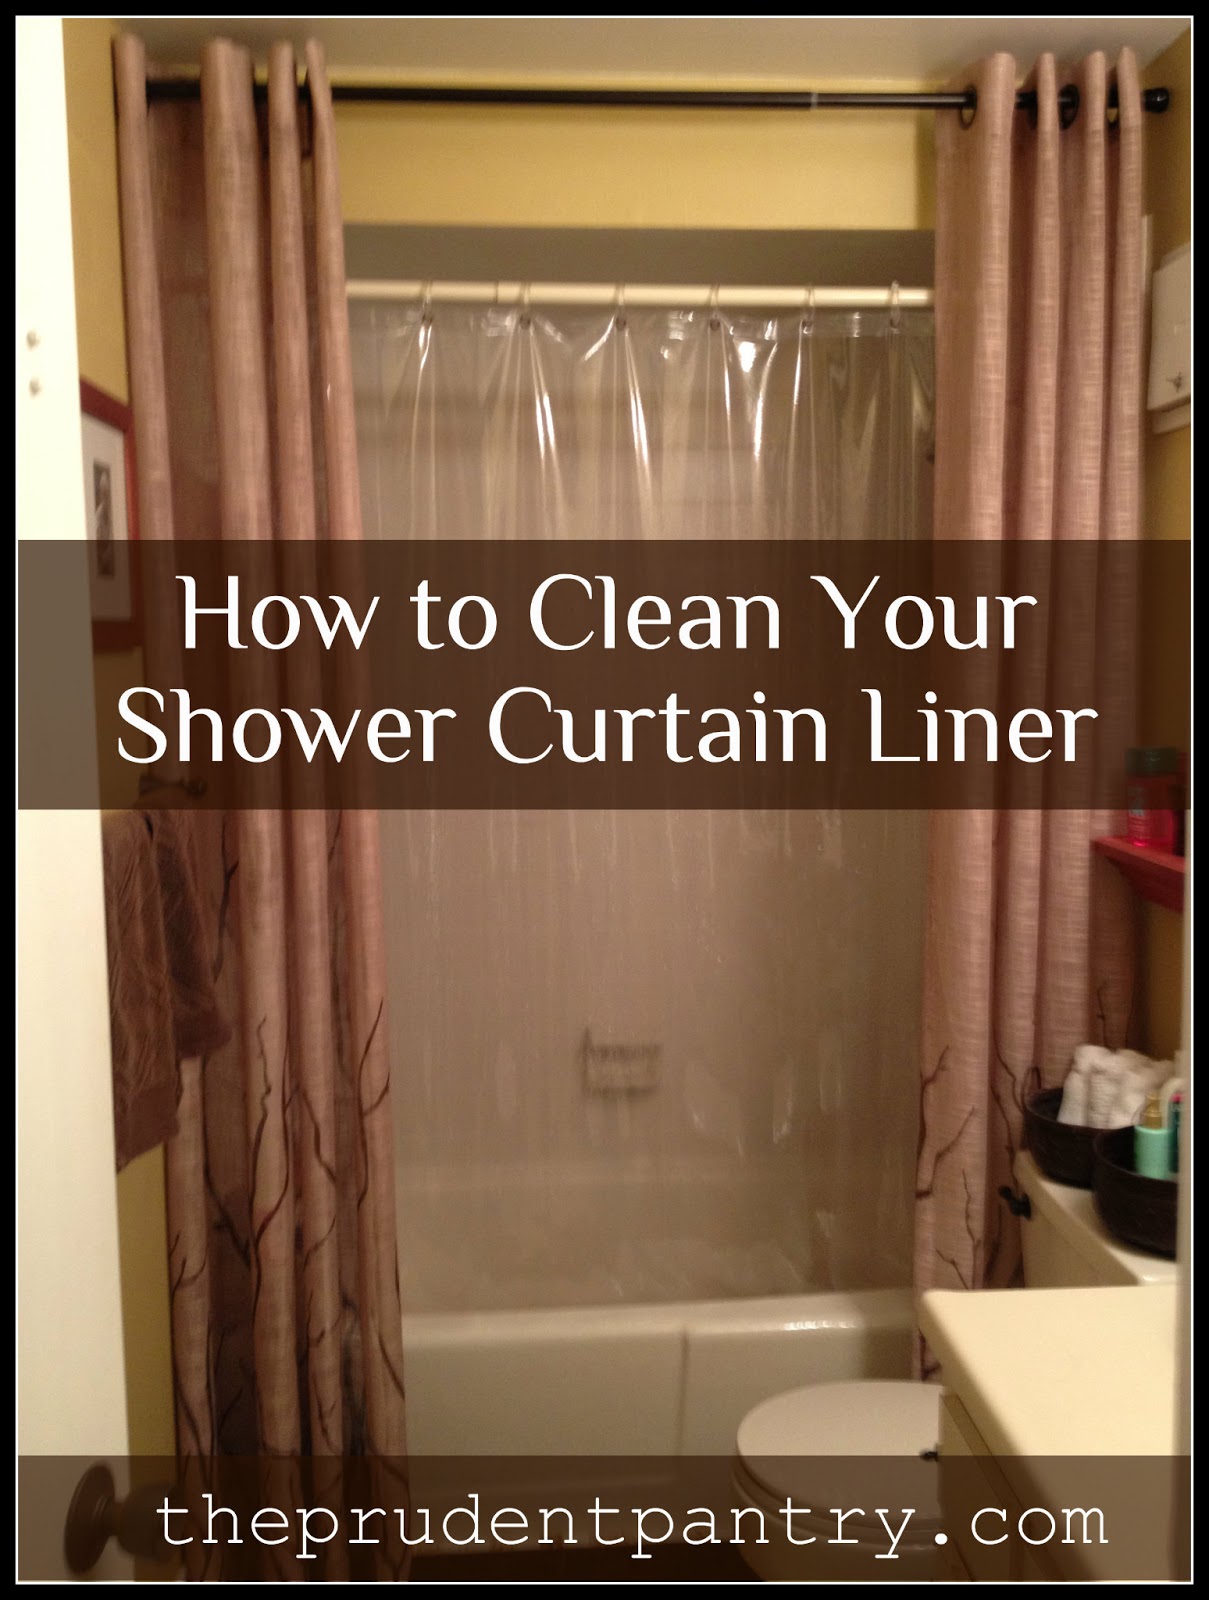 February Deep Cleaning Checklist Keep, How To Wash Vinyl Shower Curtain Liner In Washing Machine